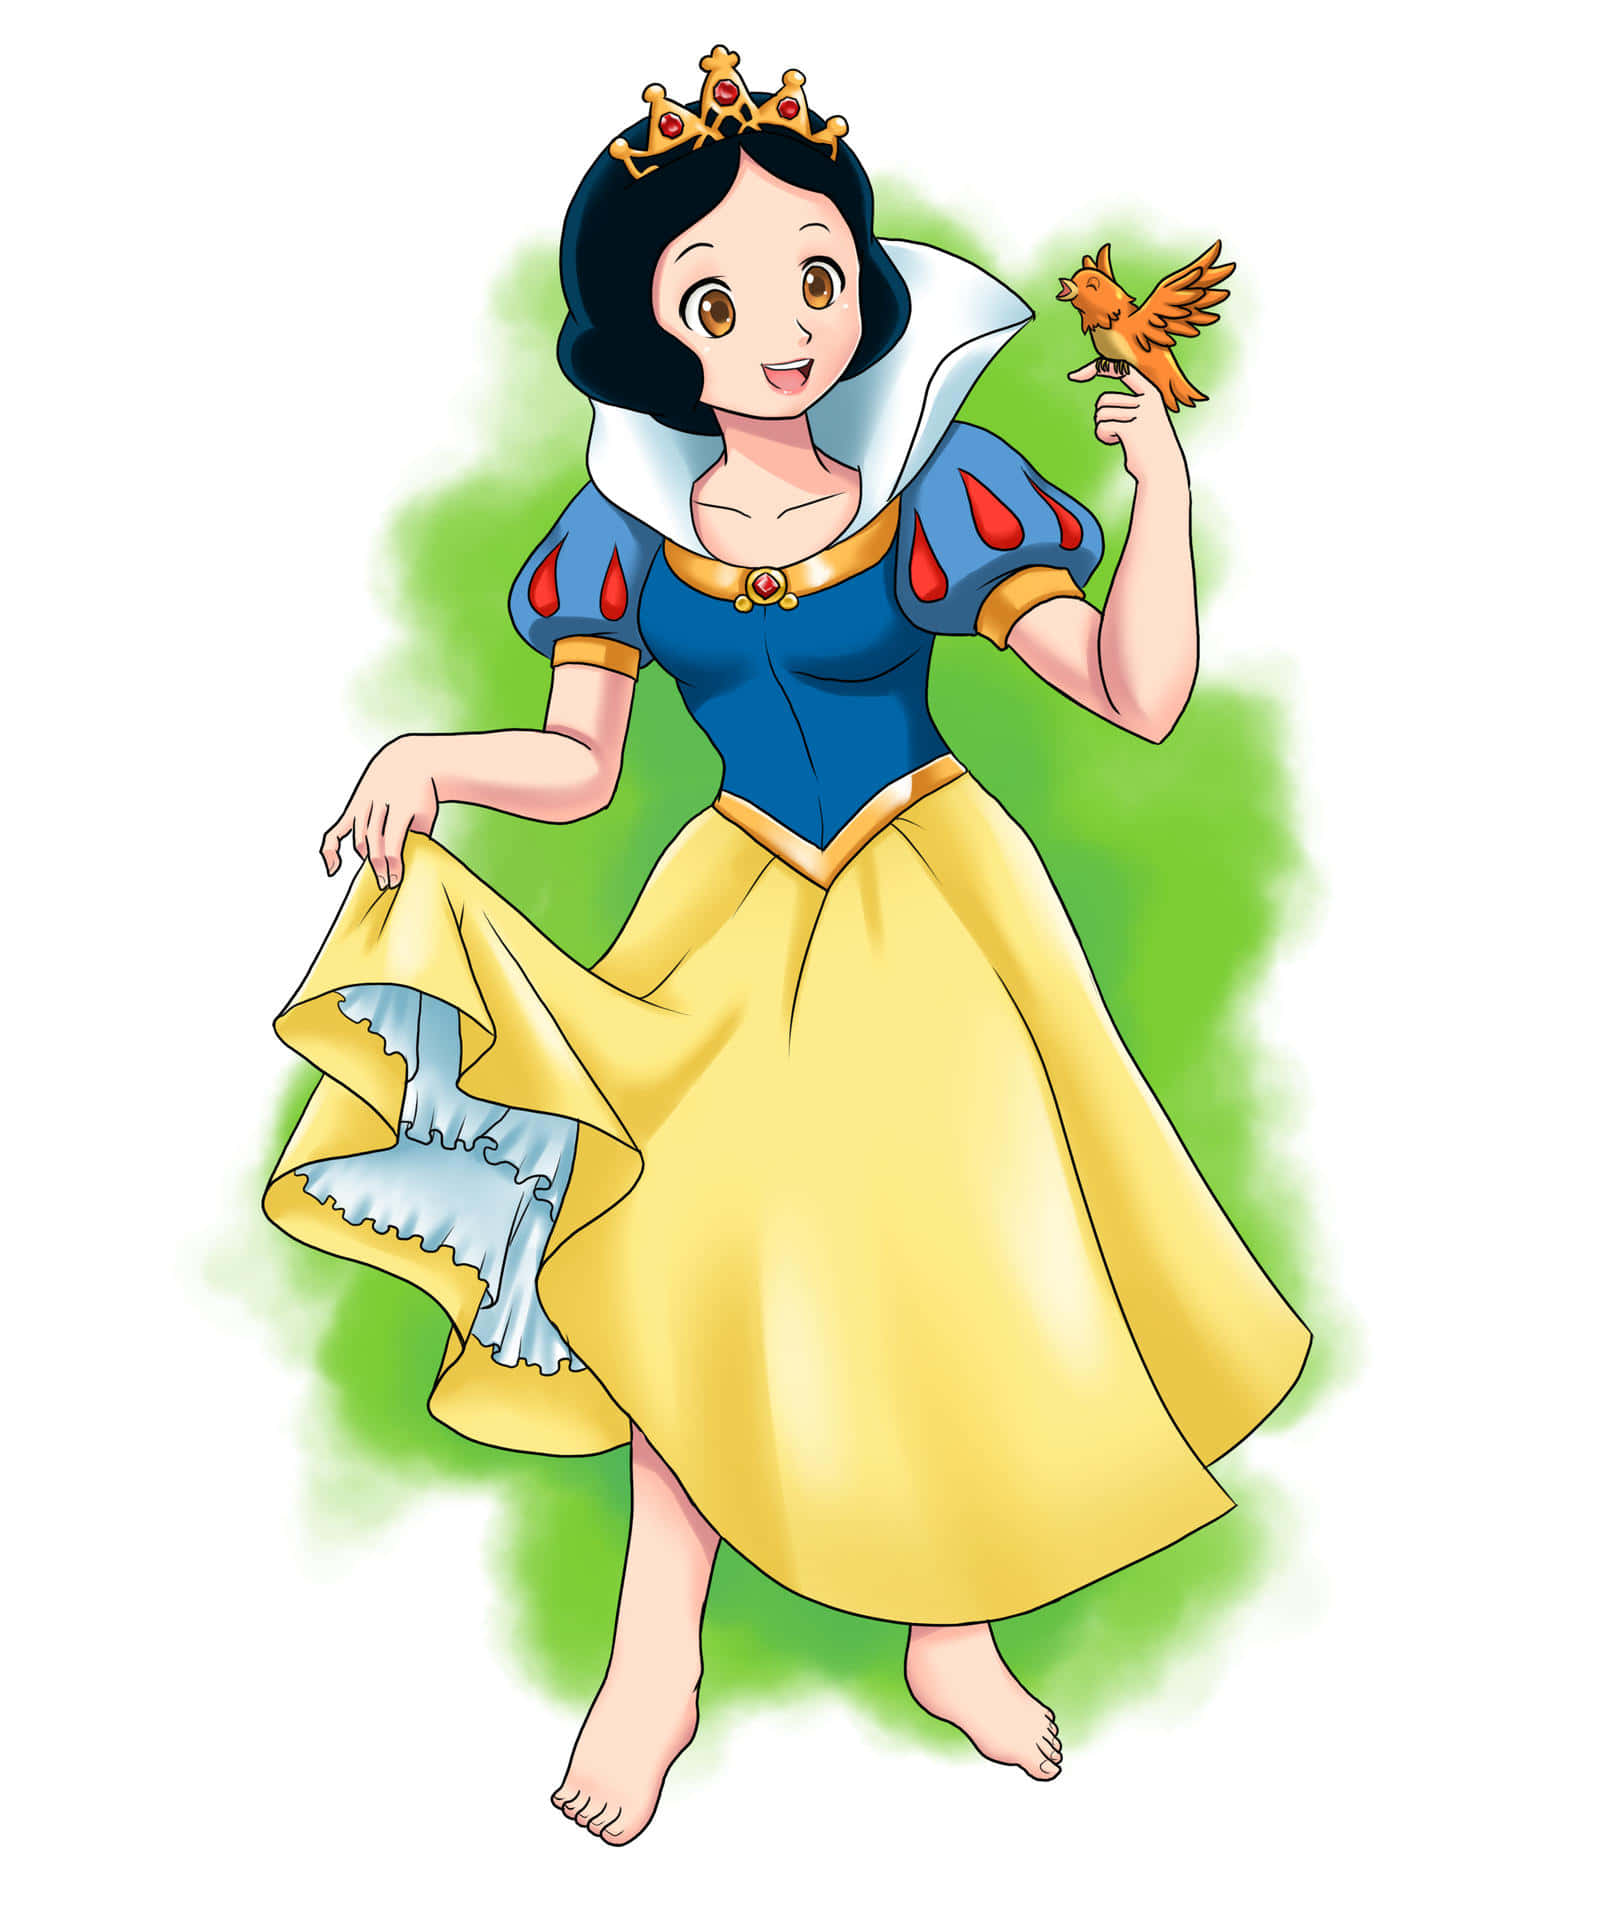 "Snow White, the Strong and Brave Fairy Tale Princess"